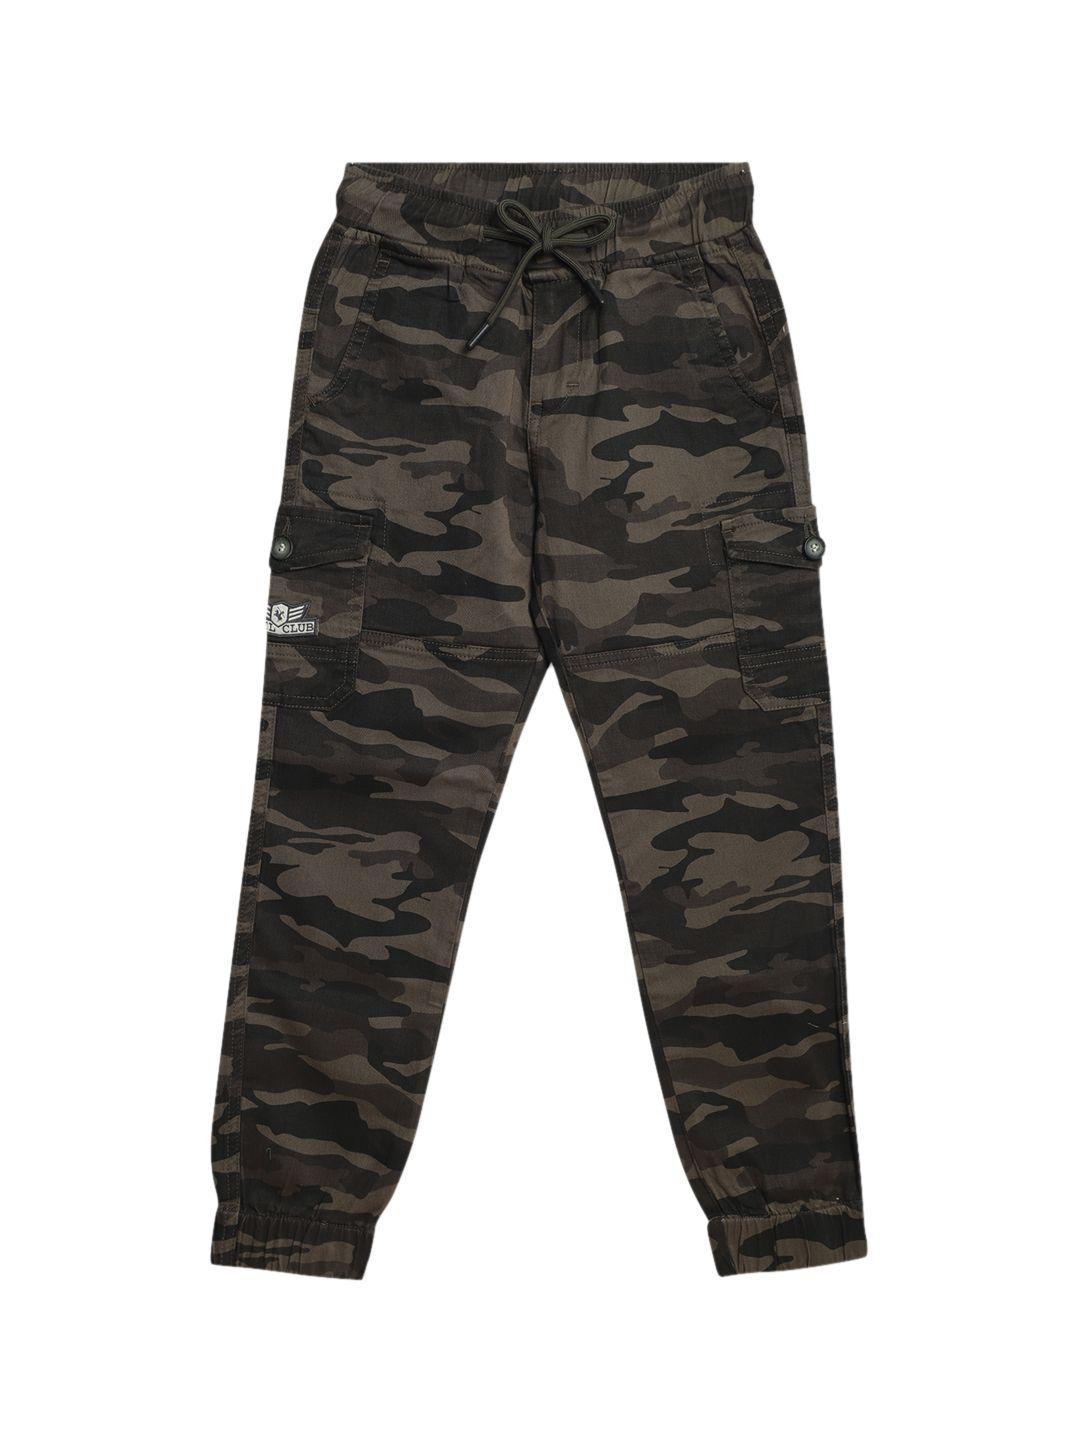 cantabil boys olive green camouflage printed joggers trousers